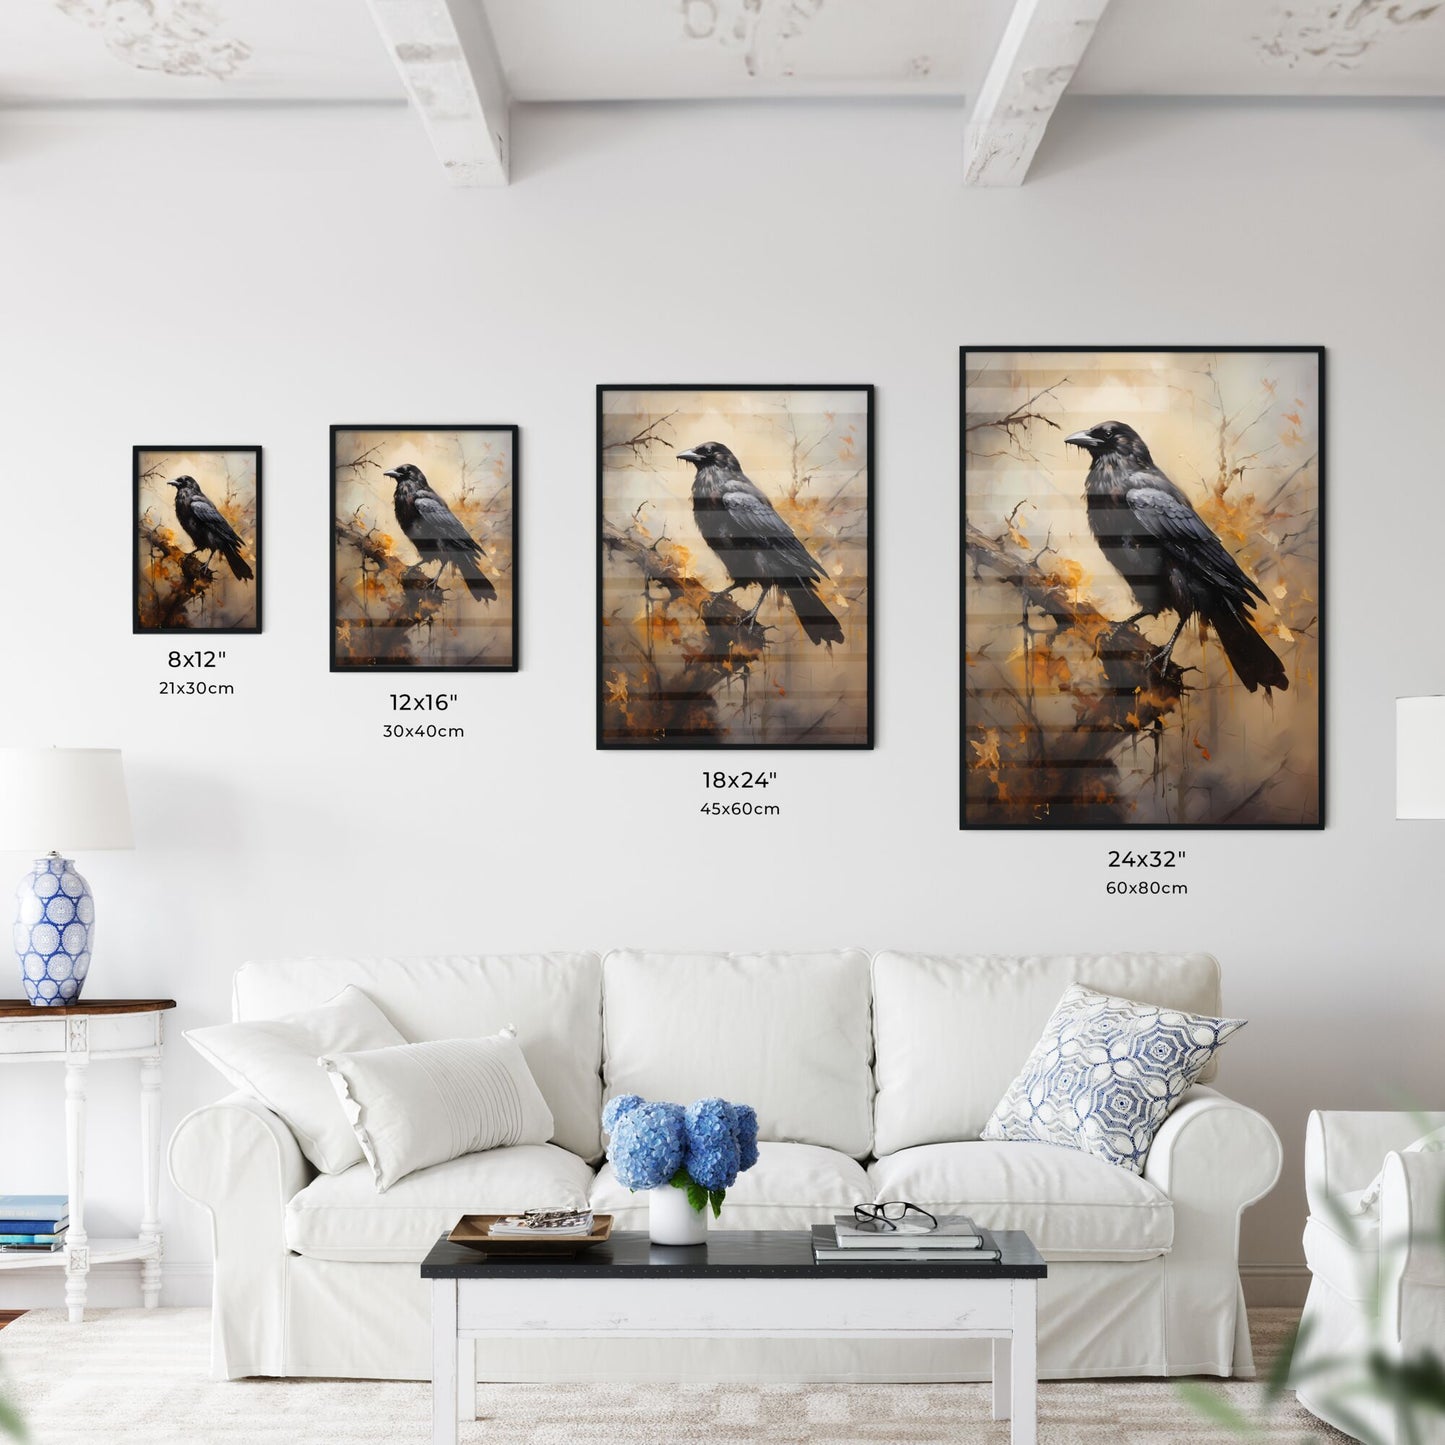 A Poster of A mysterious oil painting with a black crow - A Black Bird On A Branch Default Title